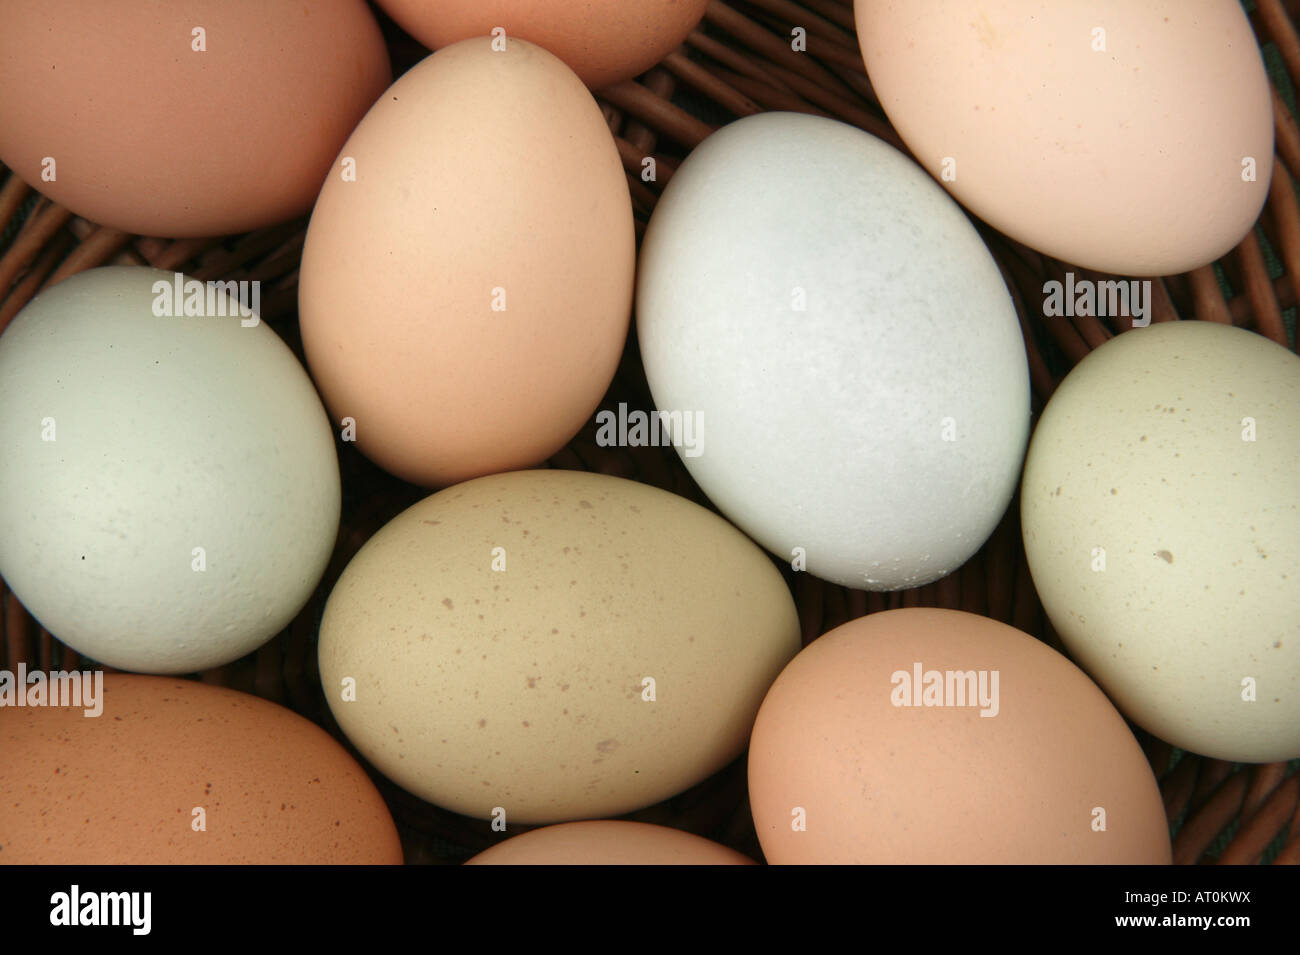 Fresh chicken eggs from various breeds. Stock Photo